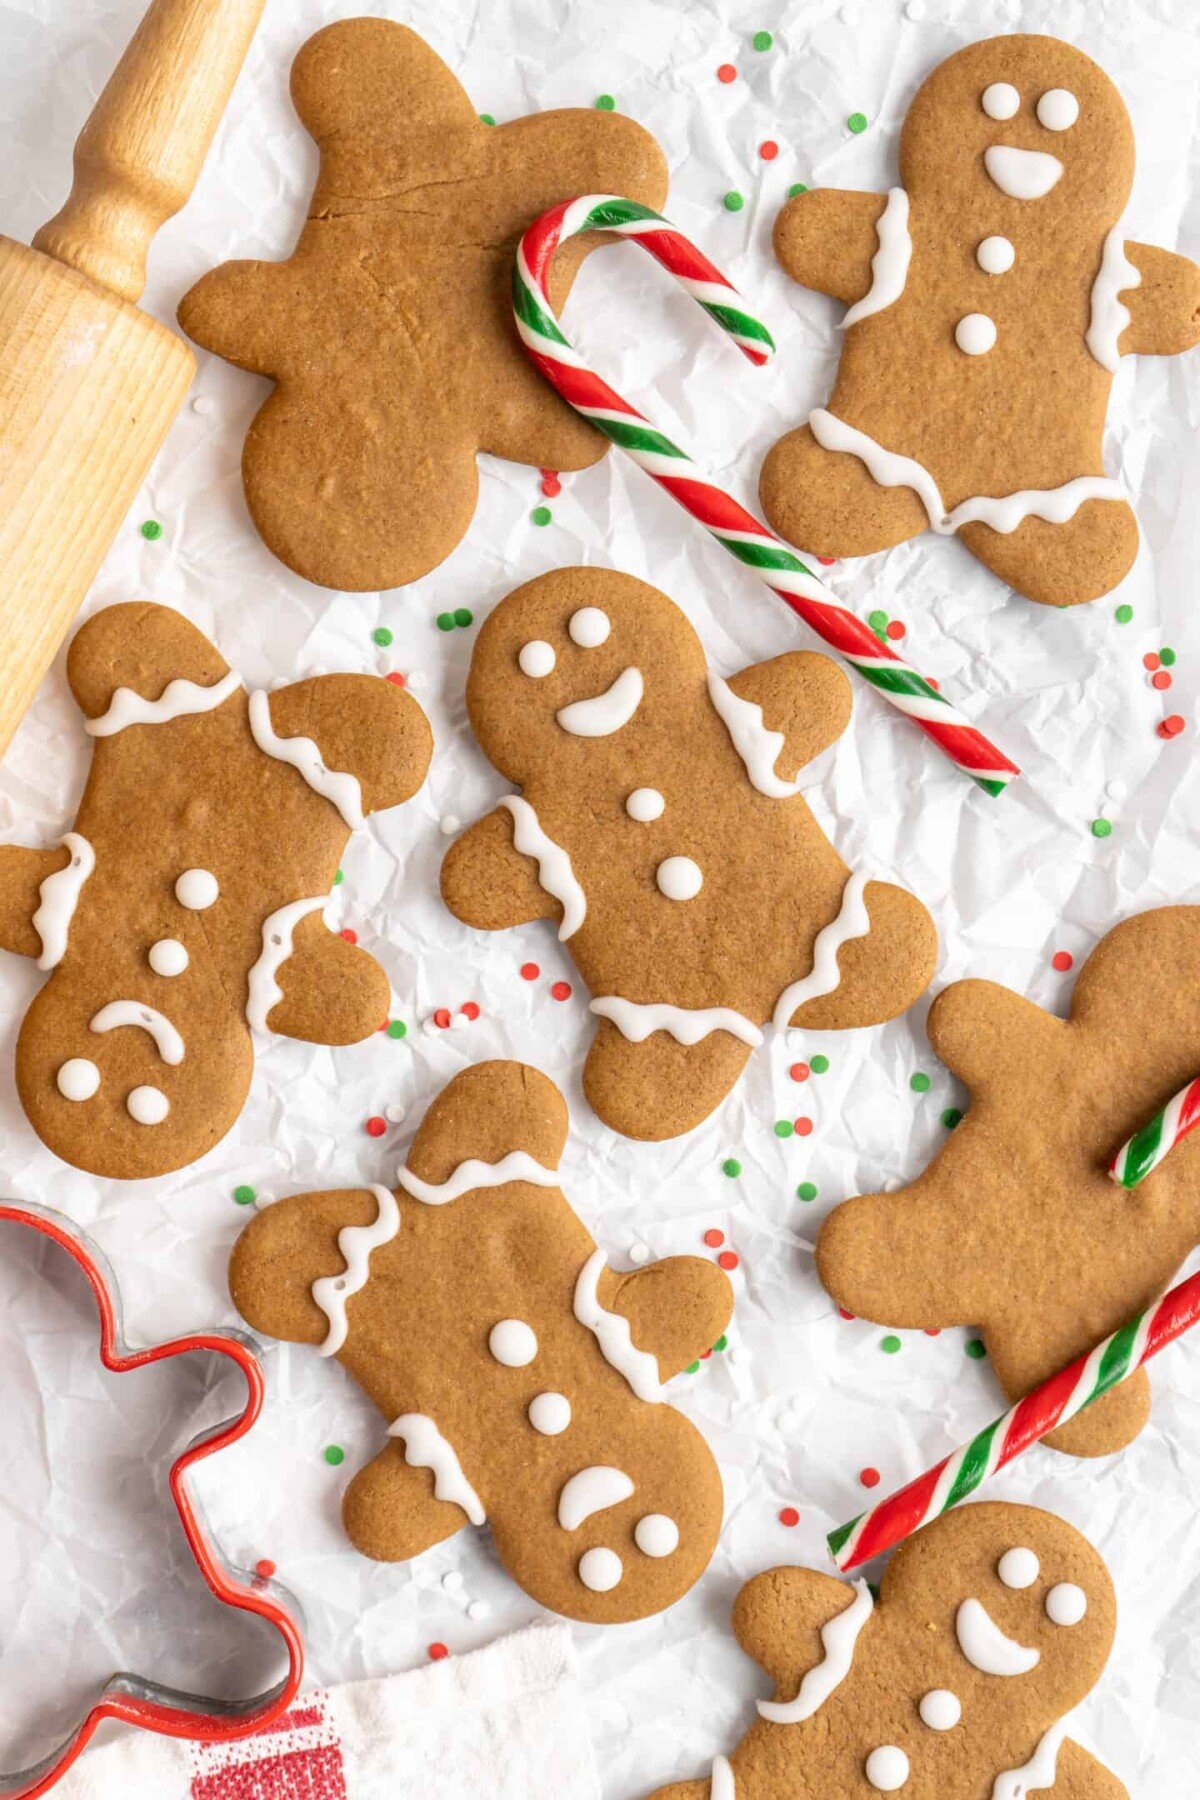 A few decorated gingerbread men next to a few undecorated gingerbread men, surrounded by candy canes and a rolling pin